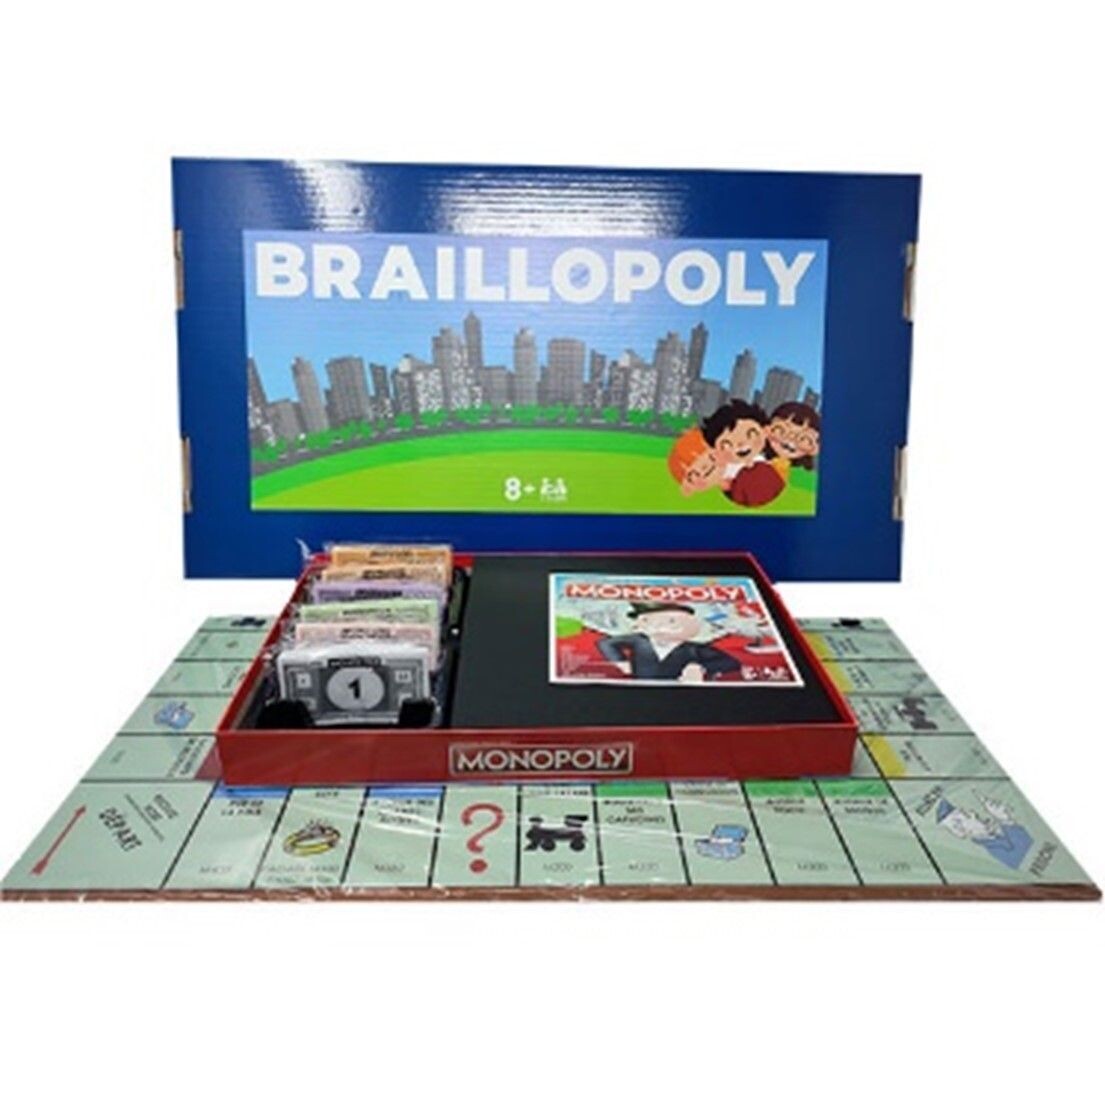 Monopoly in Braille Braillopoly